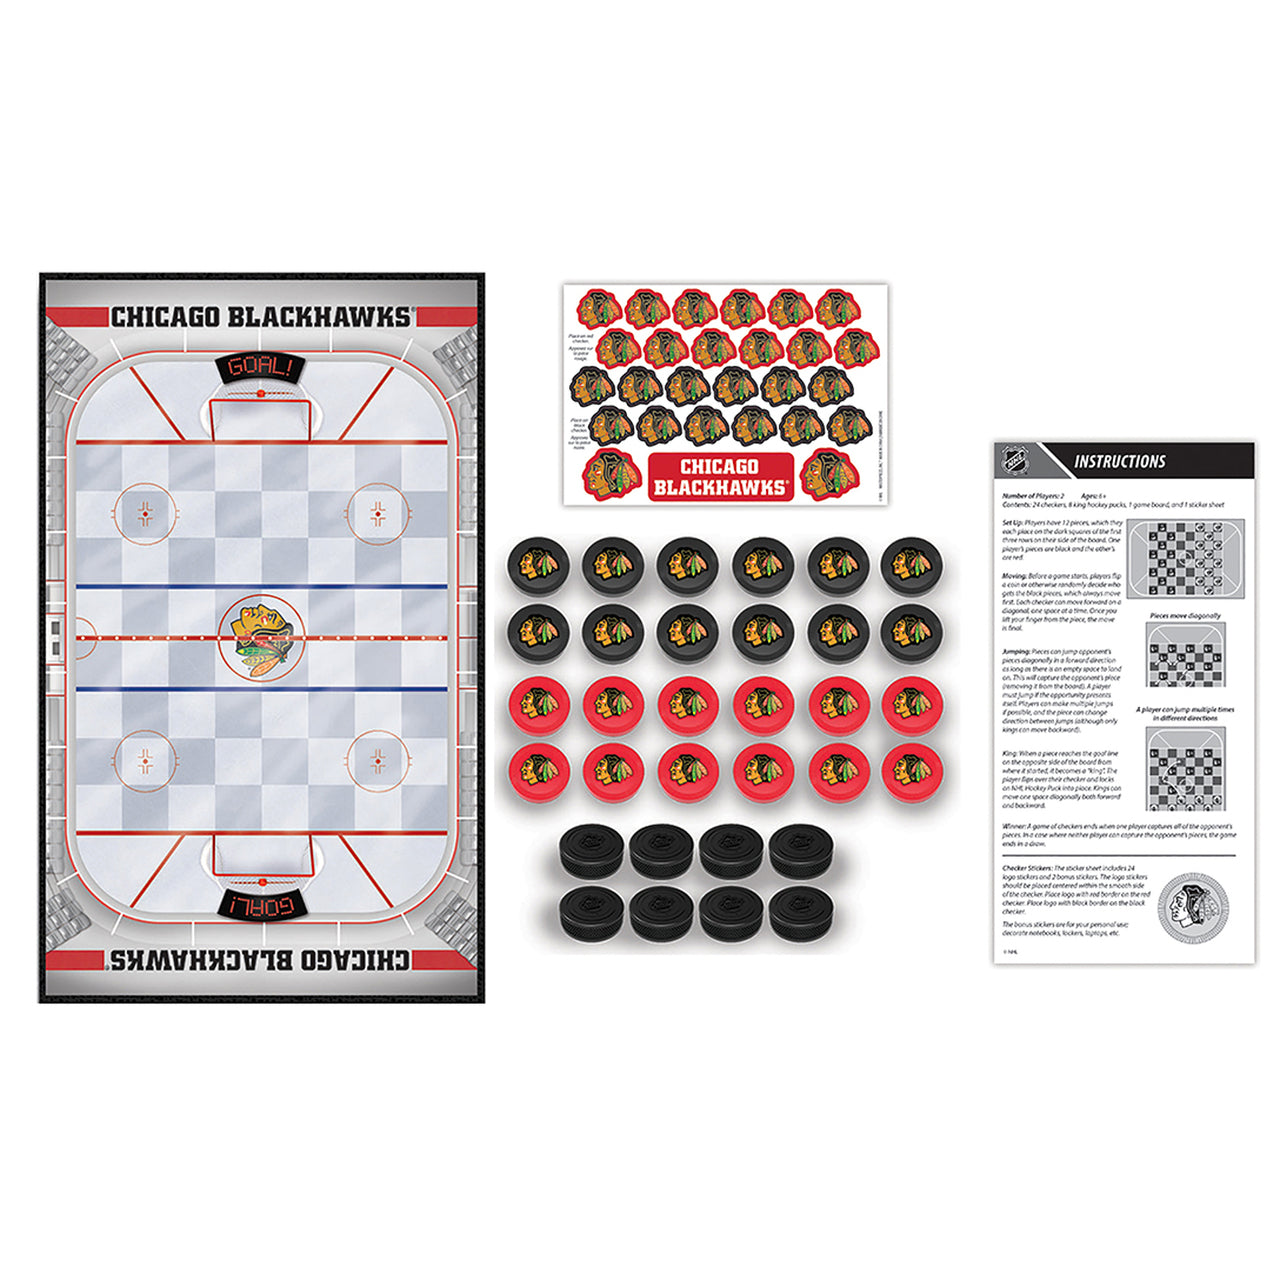 Chicago Blackhawks Checkers Board Game by Masterpieces